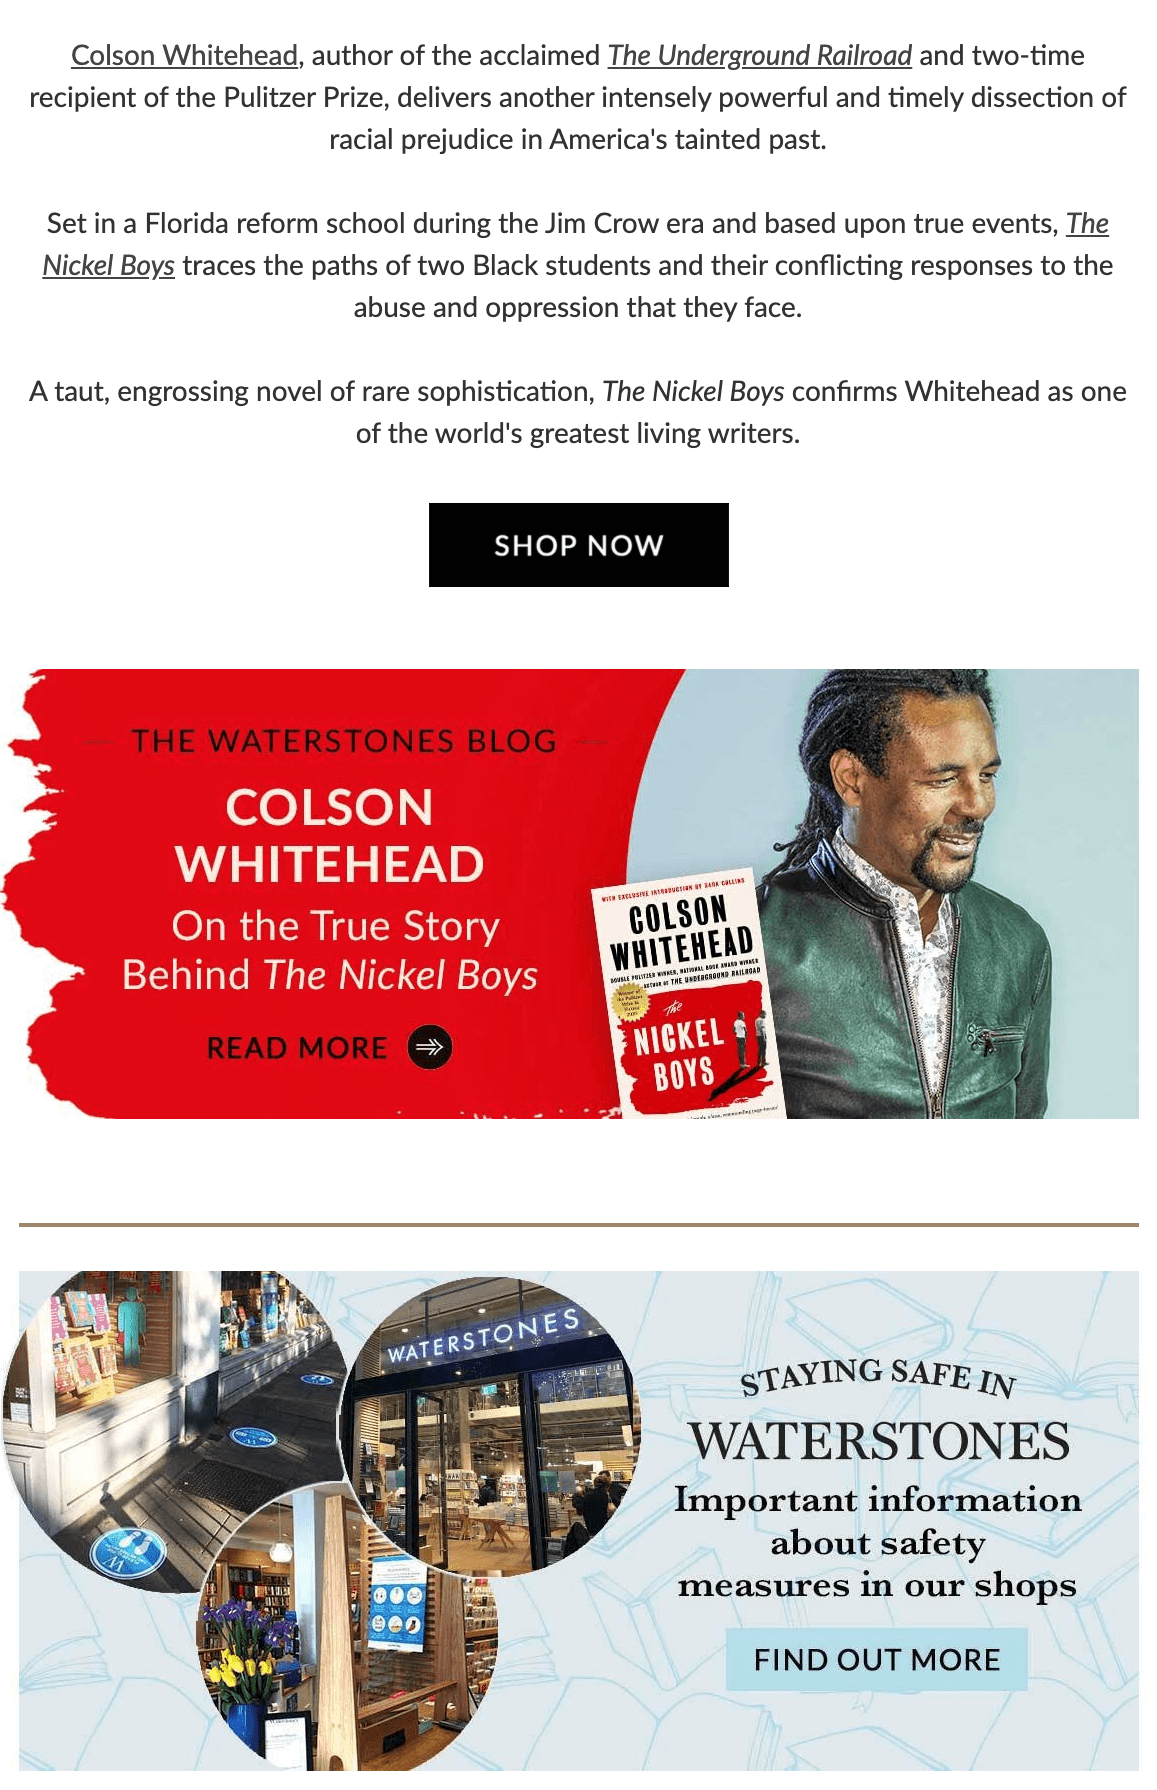 Image of an email campaign by Waterstones with links to their social media in the footer.